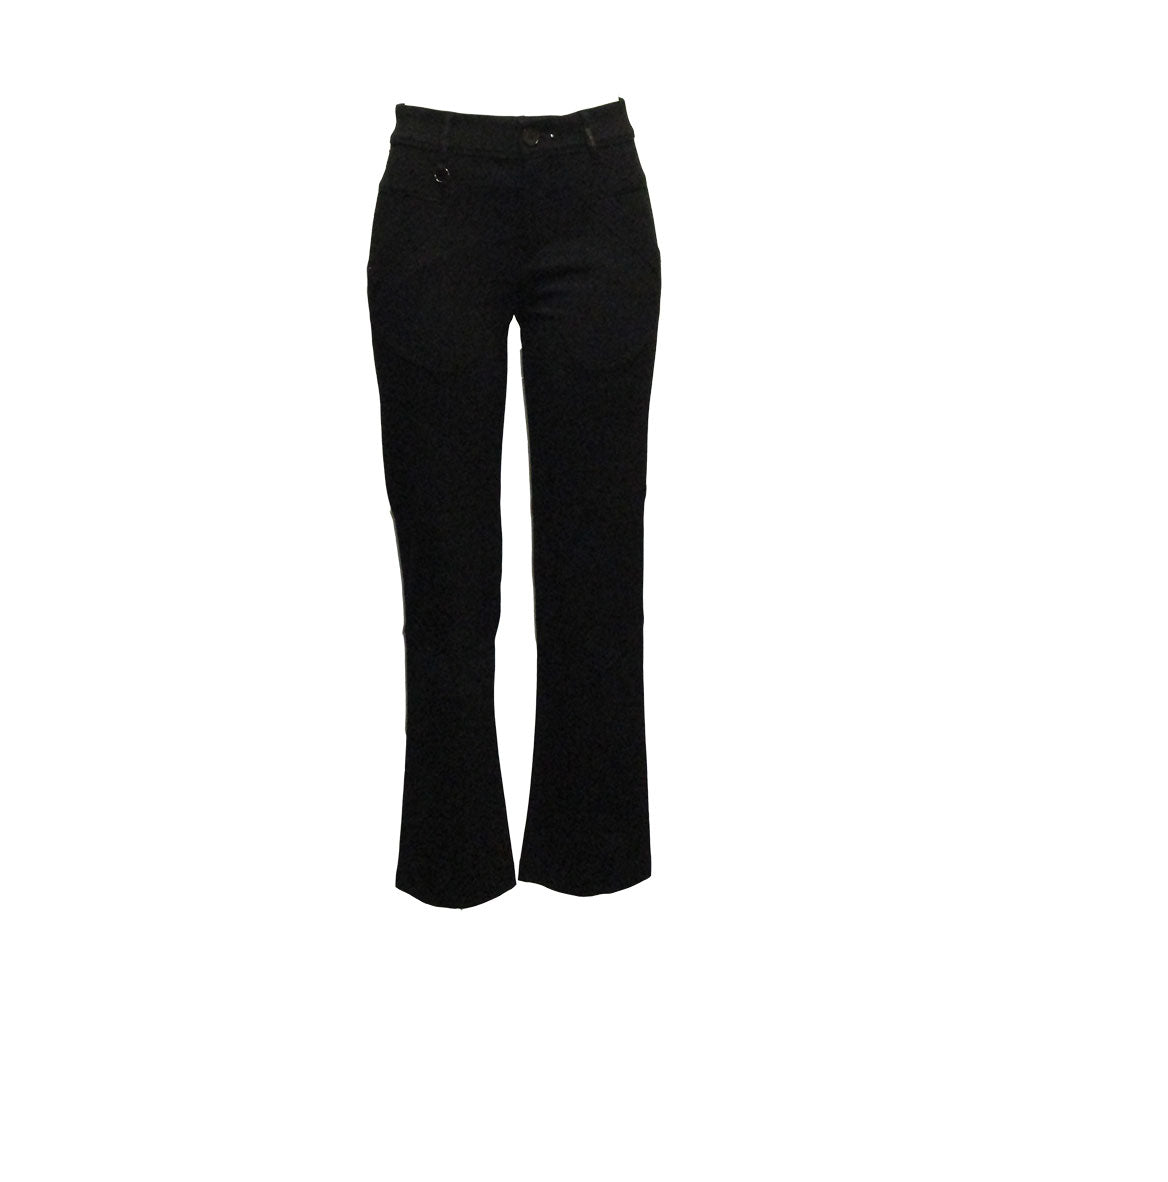 PANTS STAND OUT, BLACK - HIGH